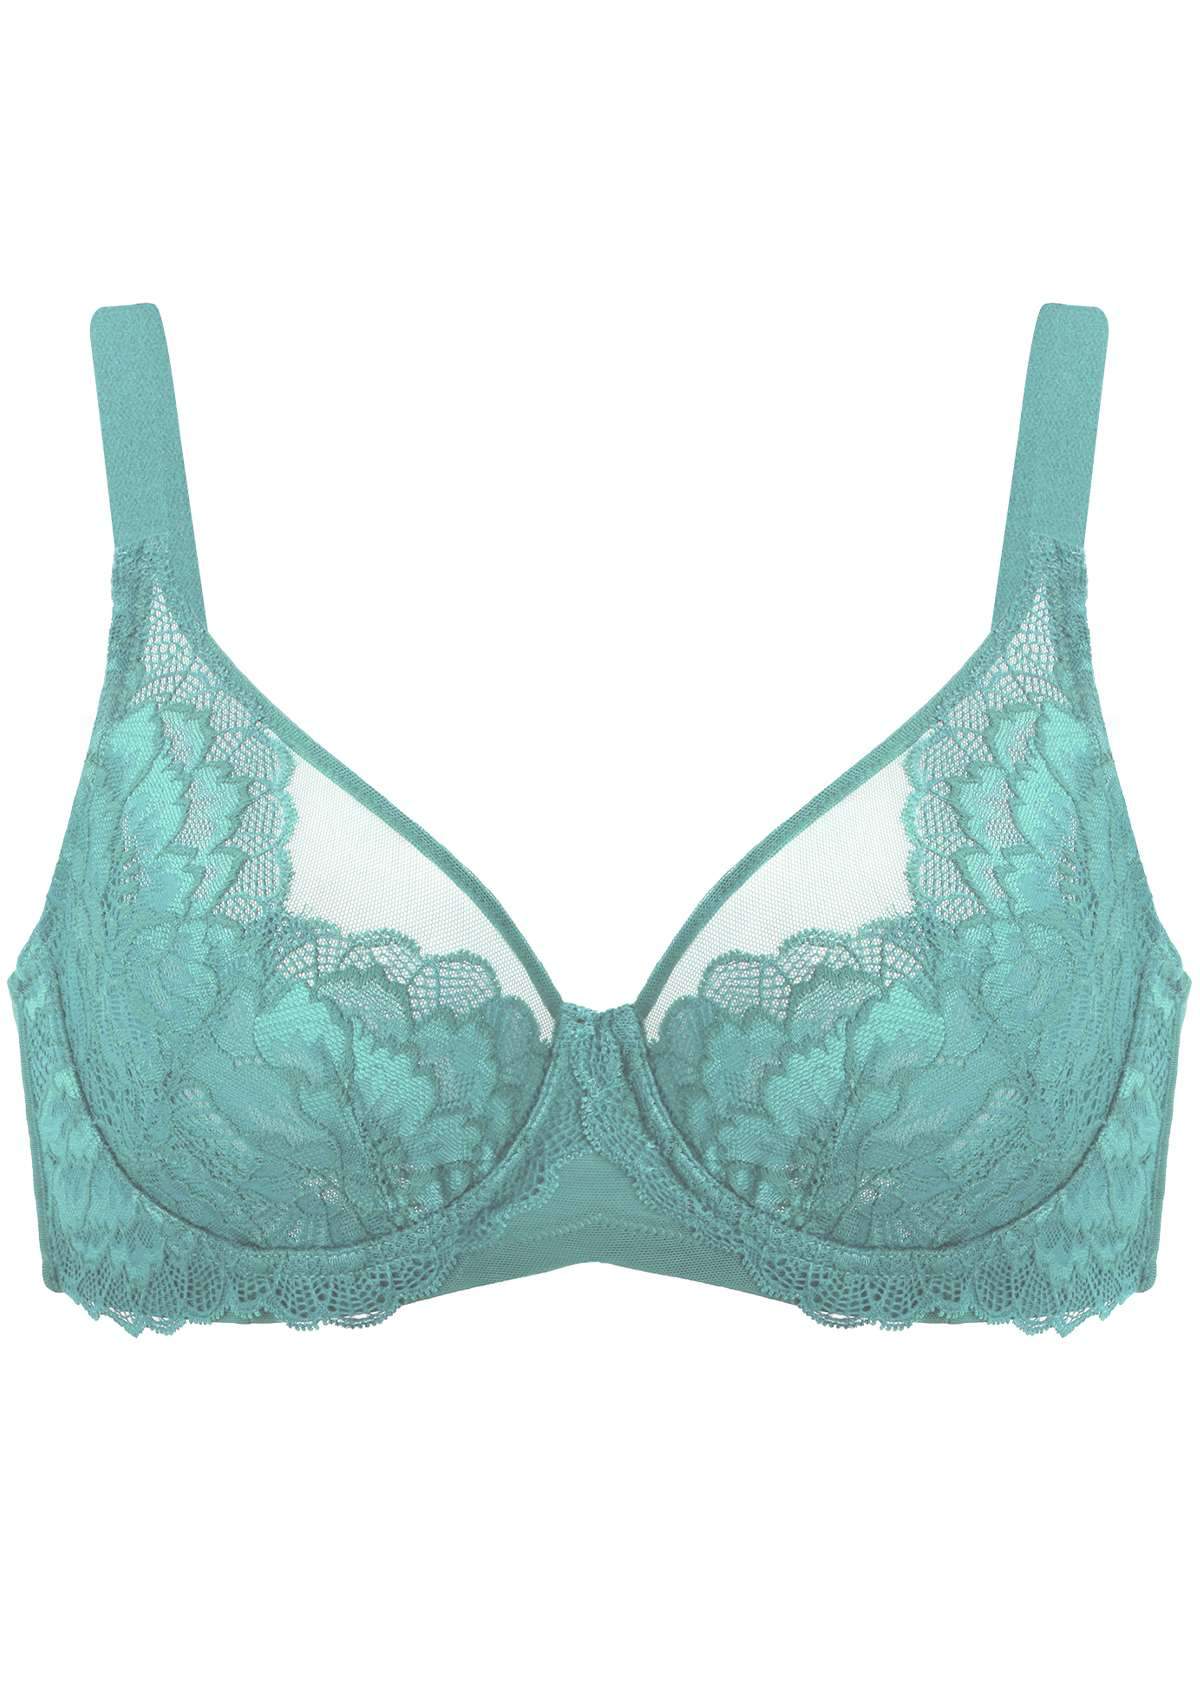 HSIA Paeonia Lace Full Coverage Underwire Non-Padded Uplifting Bra - Light Coral / 42 / D